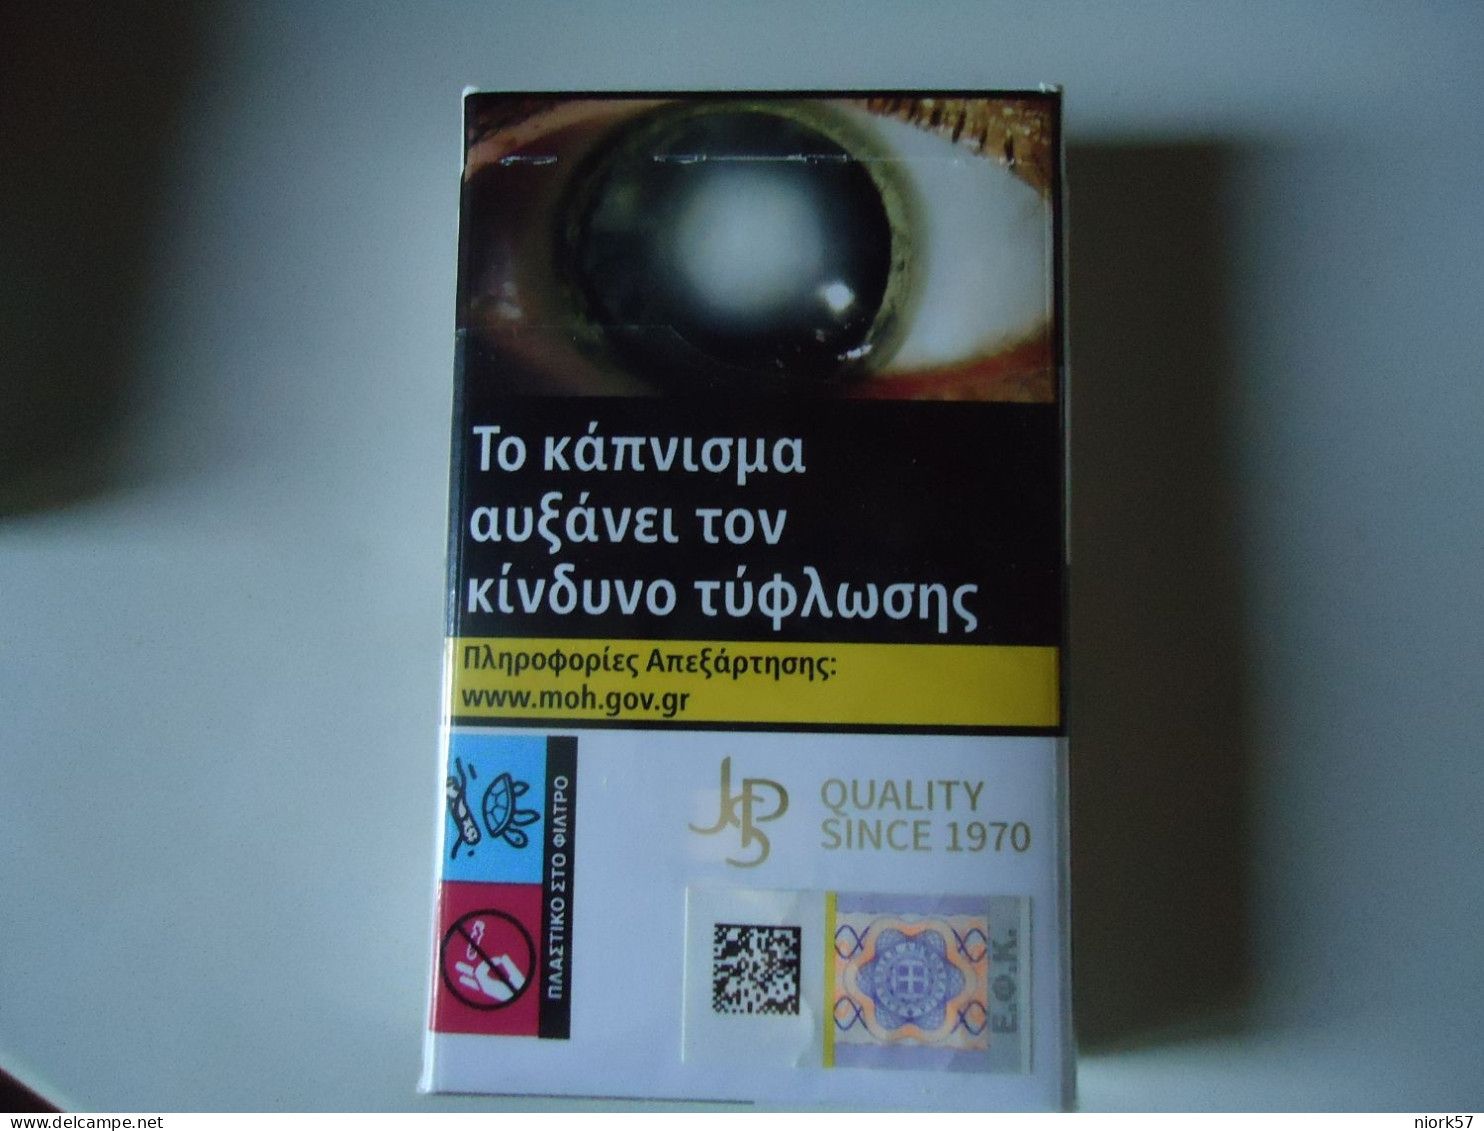 GREECE USED EMPTY CIGARETTES BOXES JB JOHN PLAYER SPESIAL - Empty Tobacco Boxes